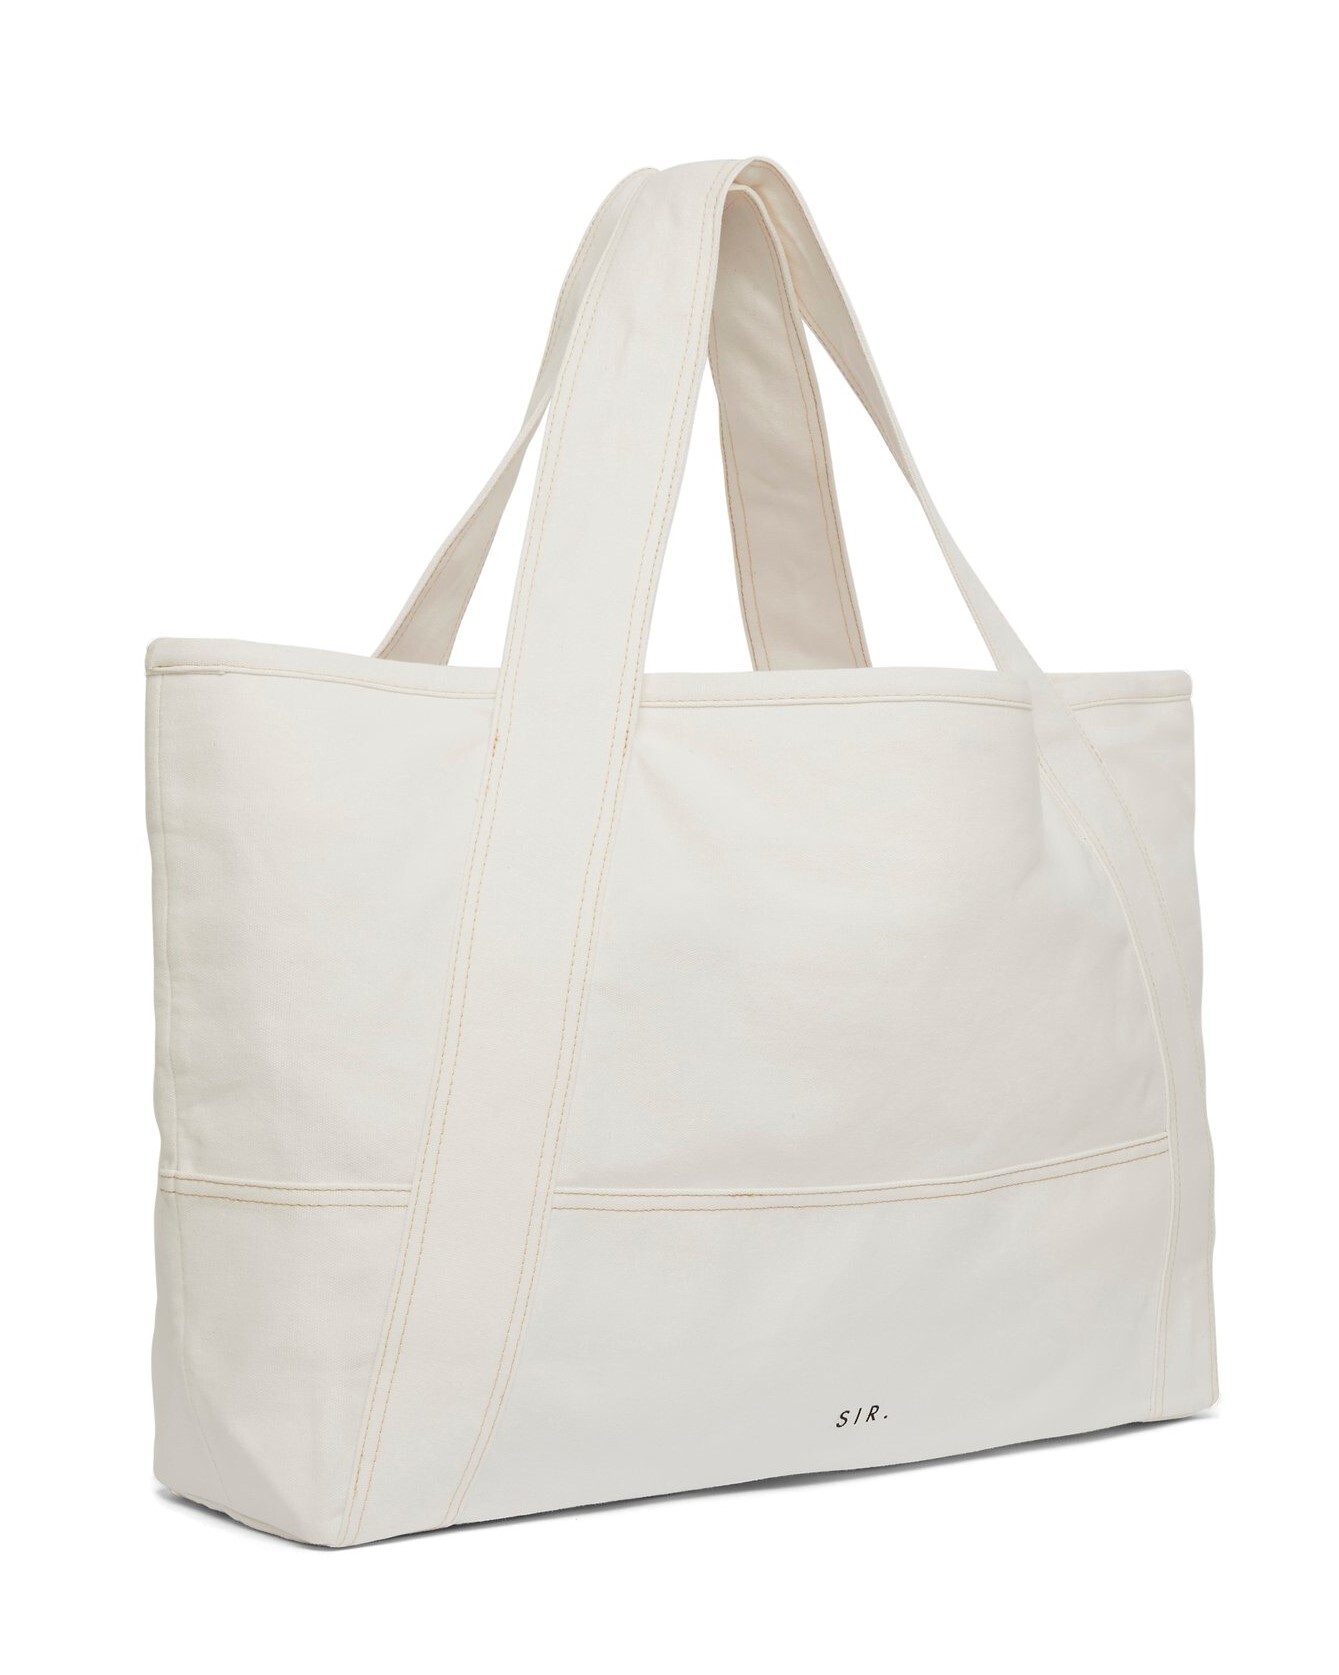 MAURICE TOTE BAG (IVORY)- SIR SUMMER 21 Boxing Day Sale